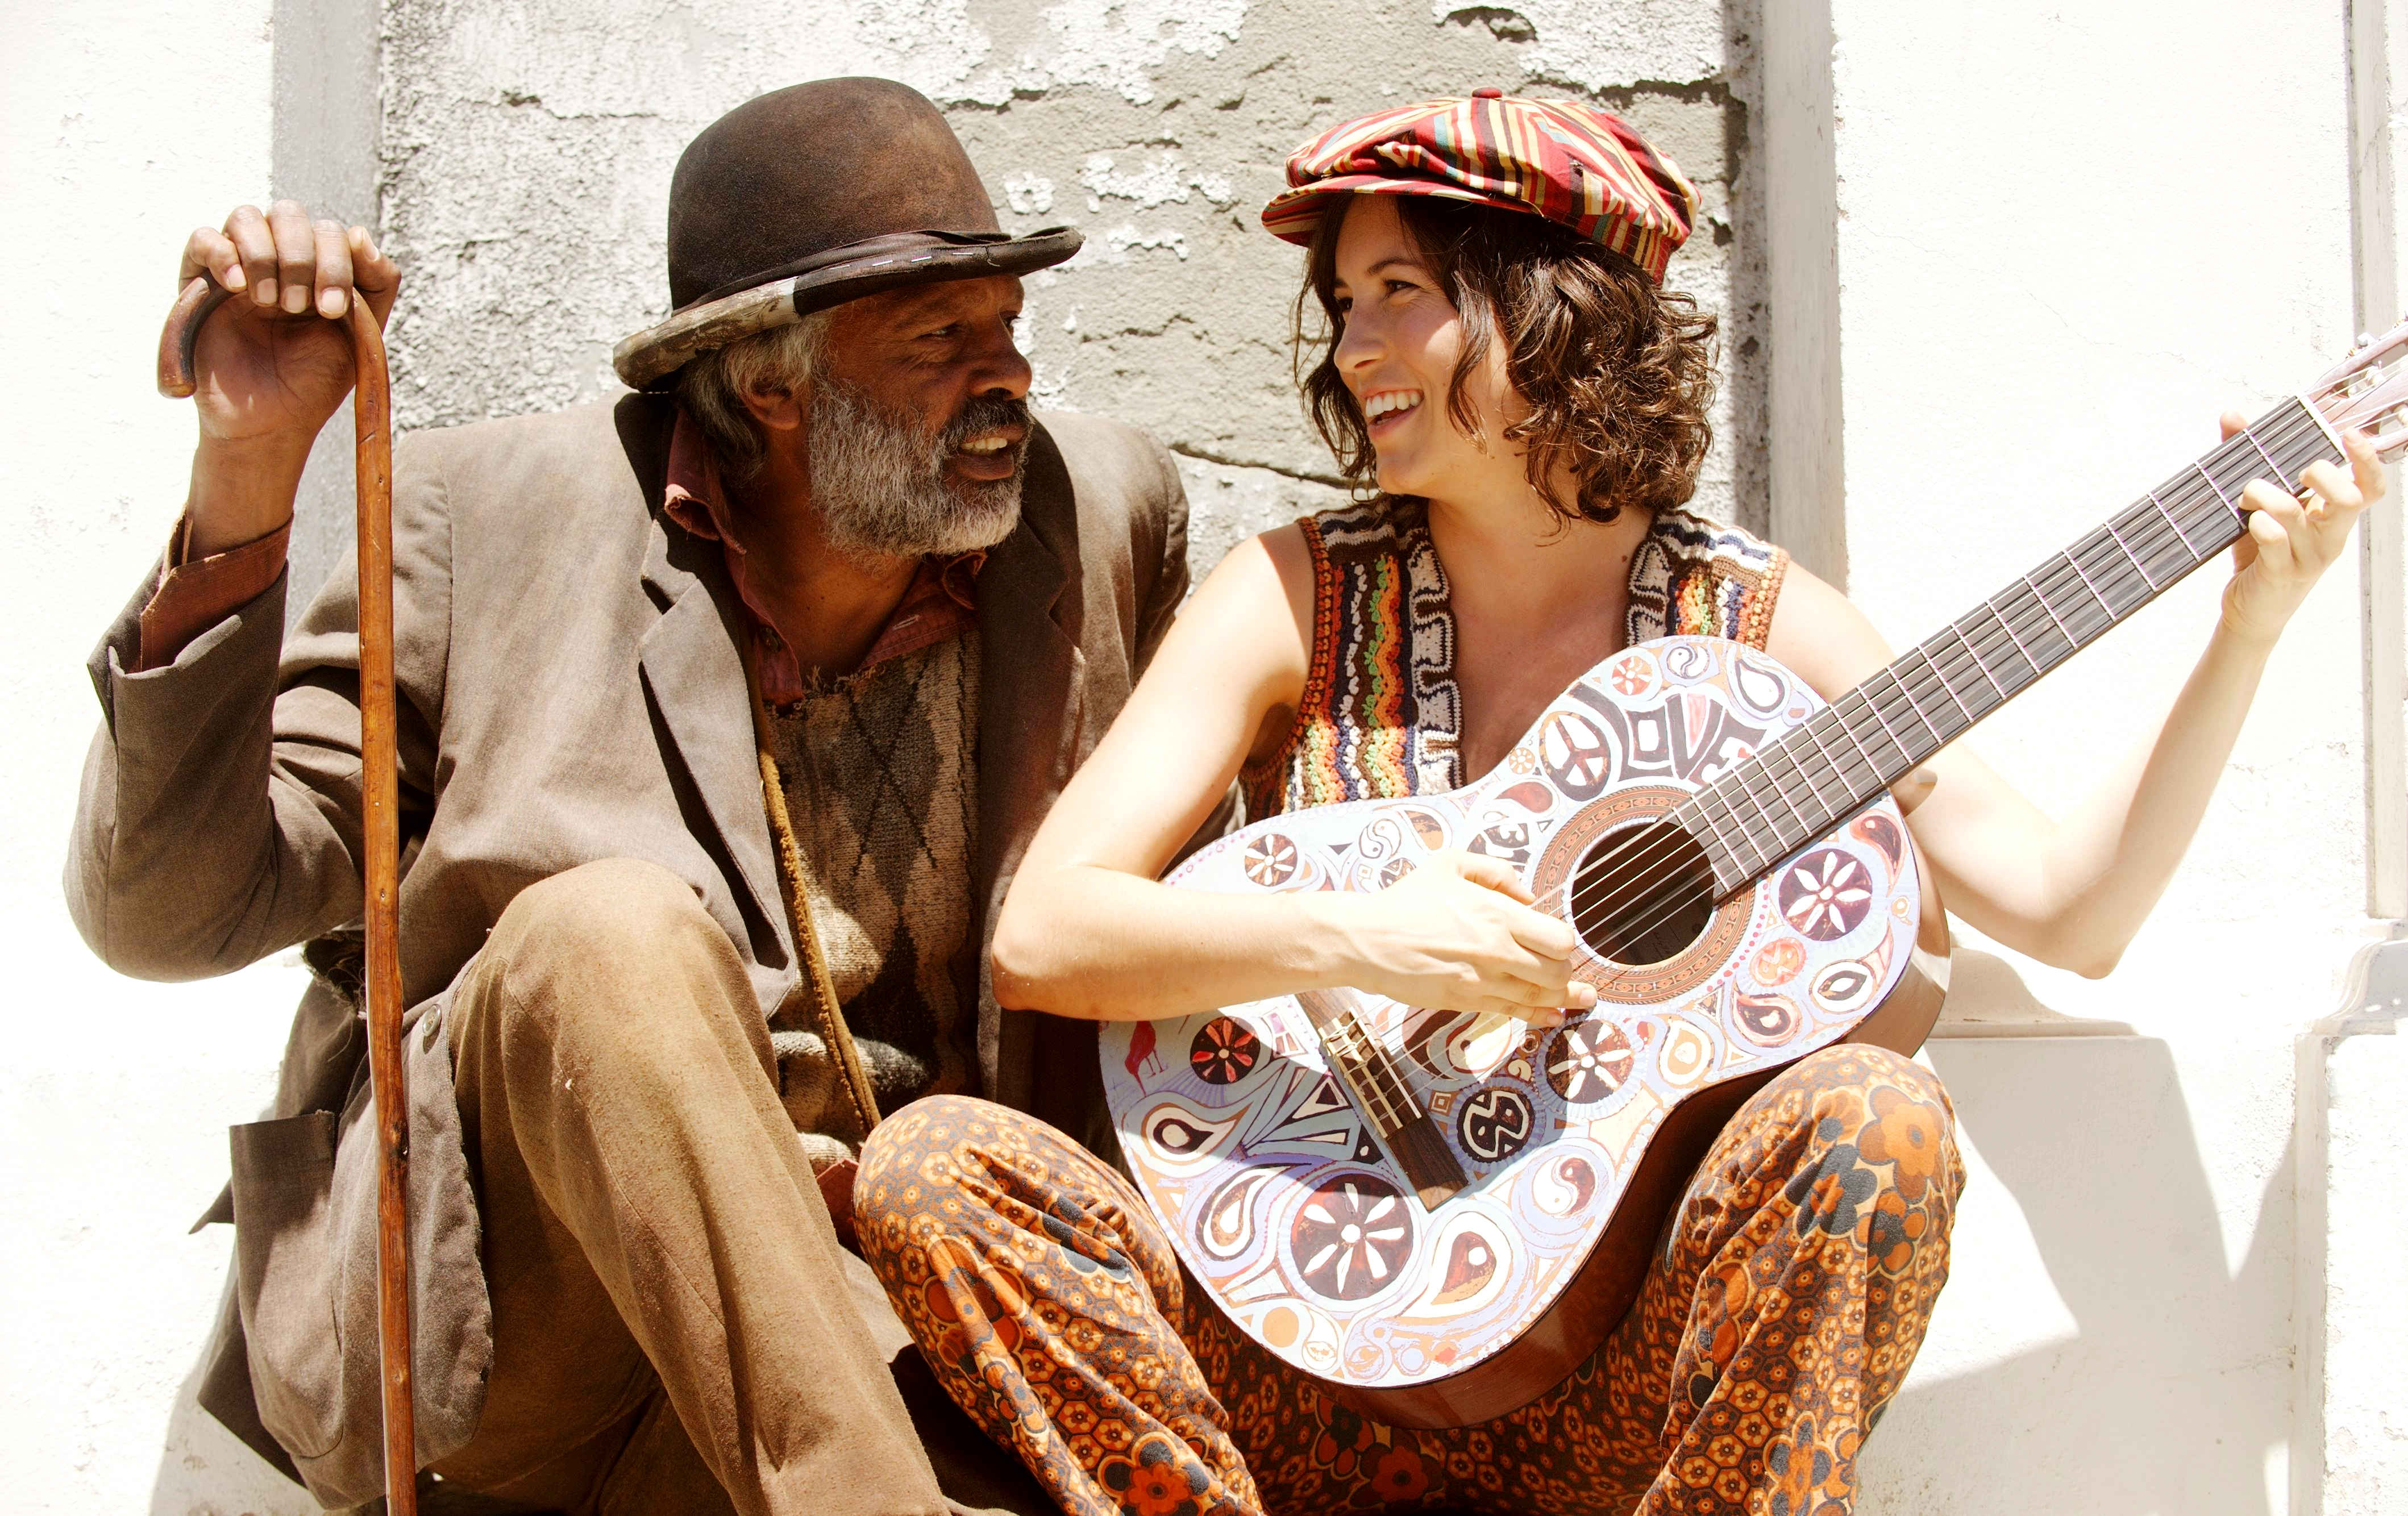 Ernie Dingo stars as Uncle Tadpole and 'Missy' Higgins stars as Annie in Freestyle Releasing's Bran Nue Dae (2010)